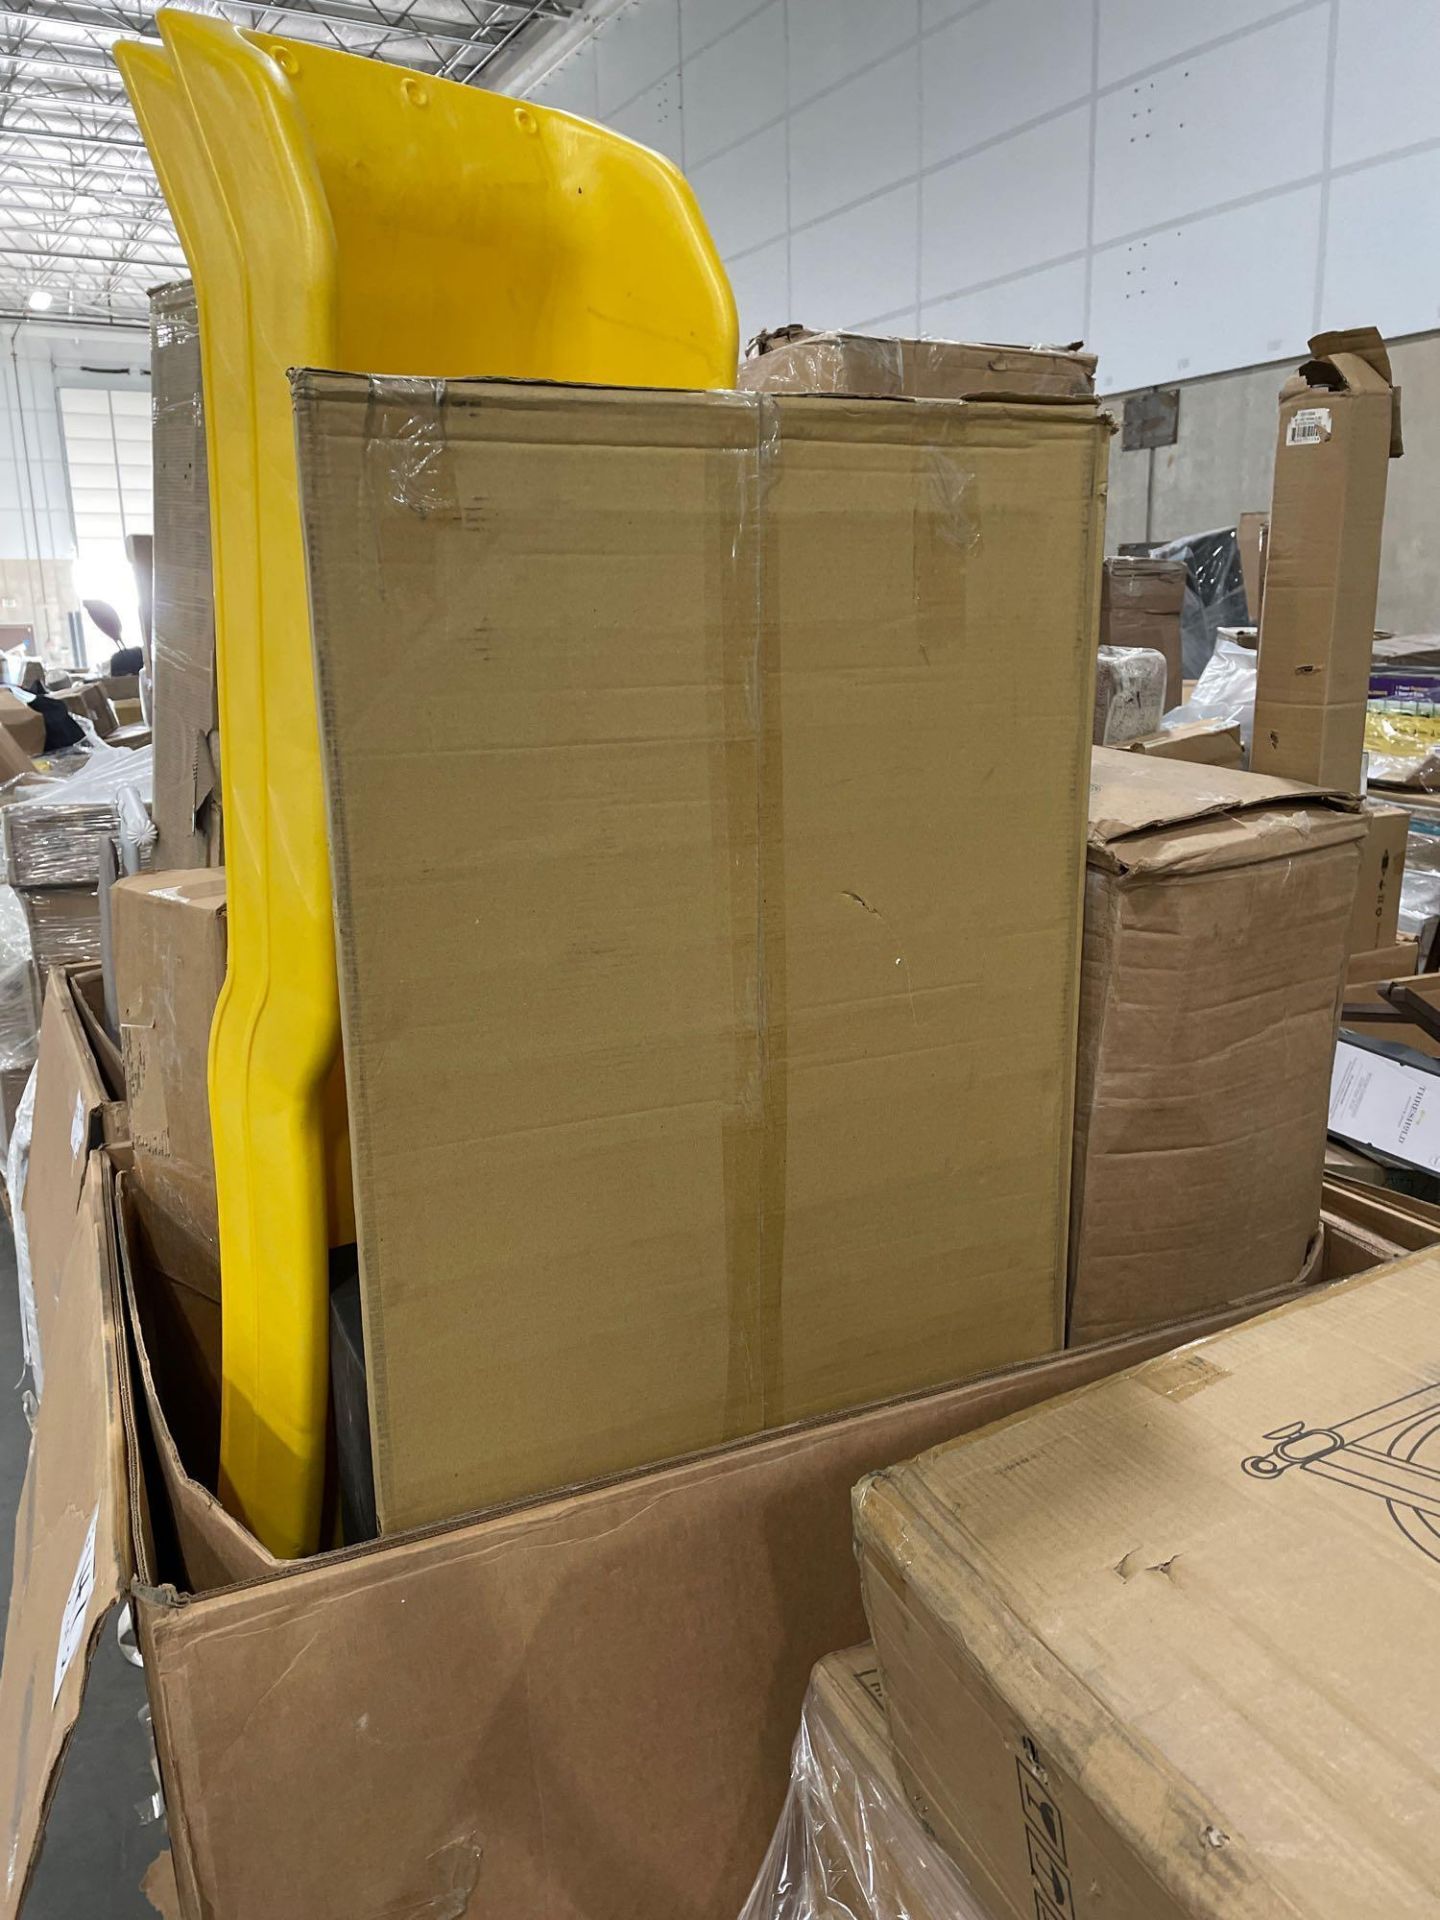 Two Pallets - Image 8 of 8